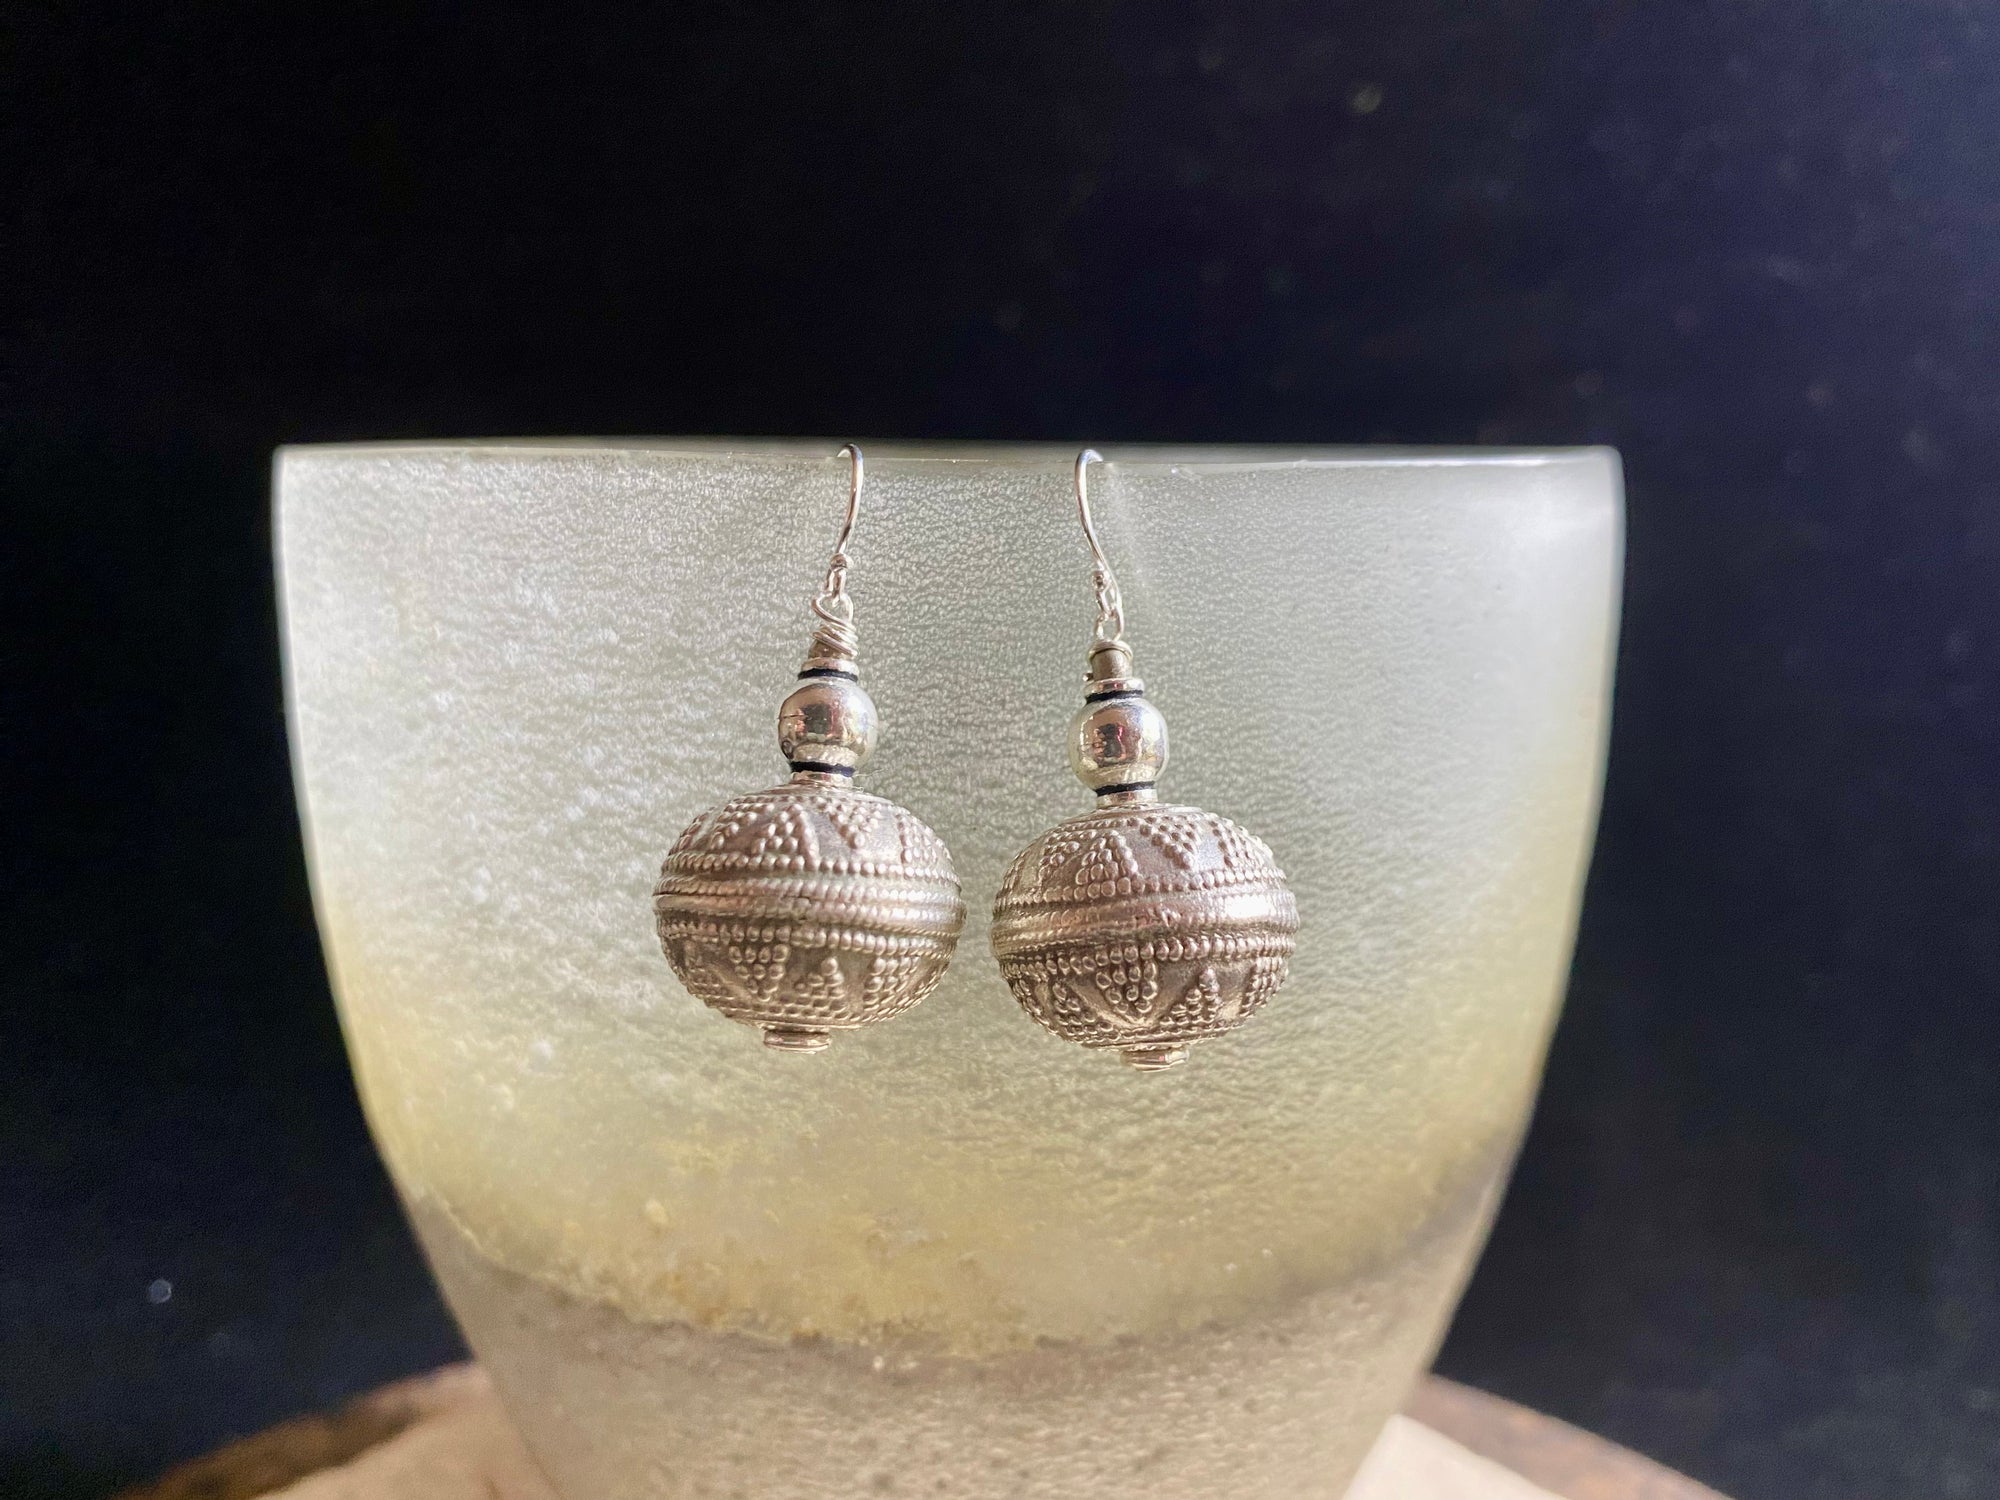 Get the look without the weight. Lightweight and easy to wear, these earrings are crafted from hollow-construction handmade vintage sterling silver beads and components.&nbsp; Mid 20th century beads collected by Bernard Heaphy from northwest India.  Measurements: length 4 cm